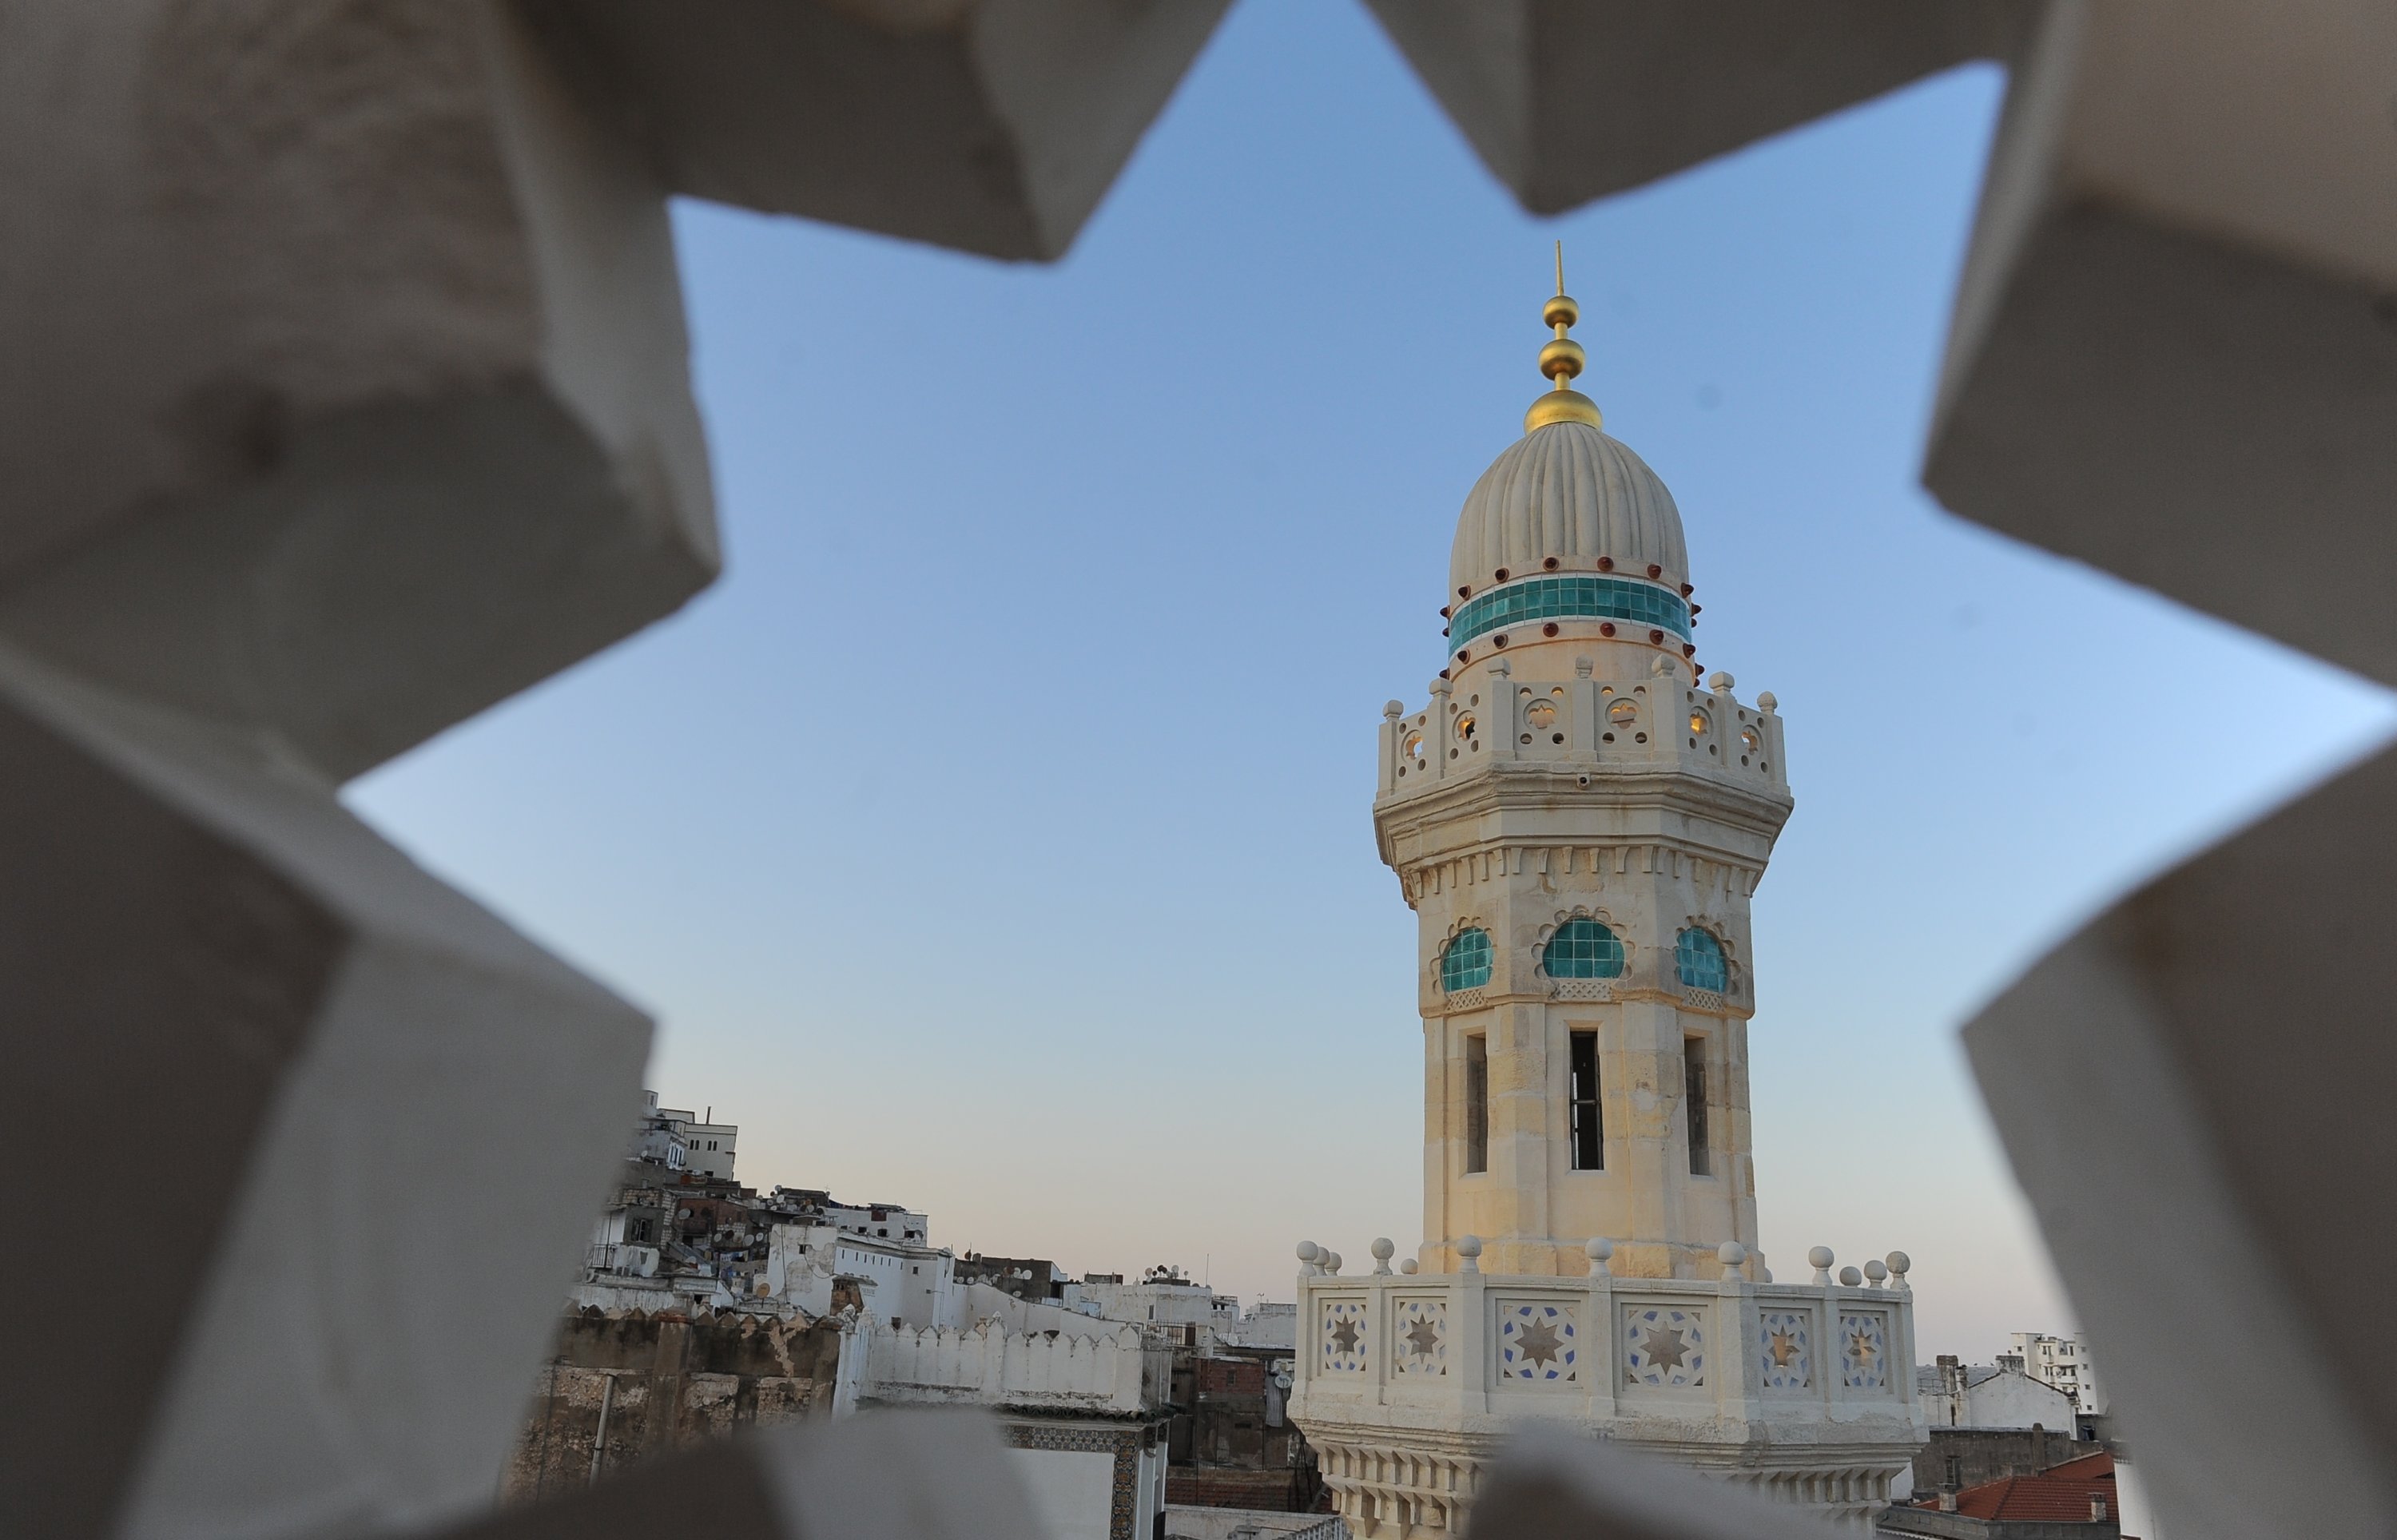 A view from the minaret of the Ketchaoua Mosque, Algiers, Algeria, Oct. 16, 2021. (AA Photo)